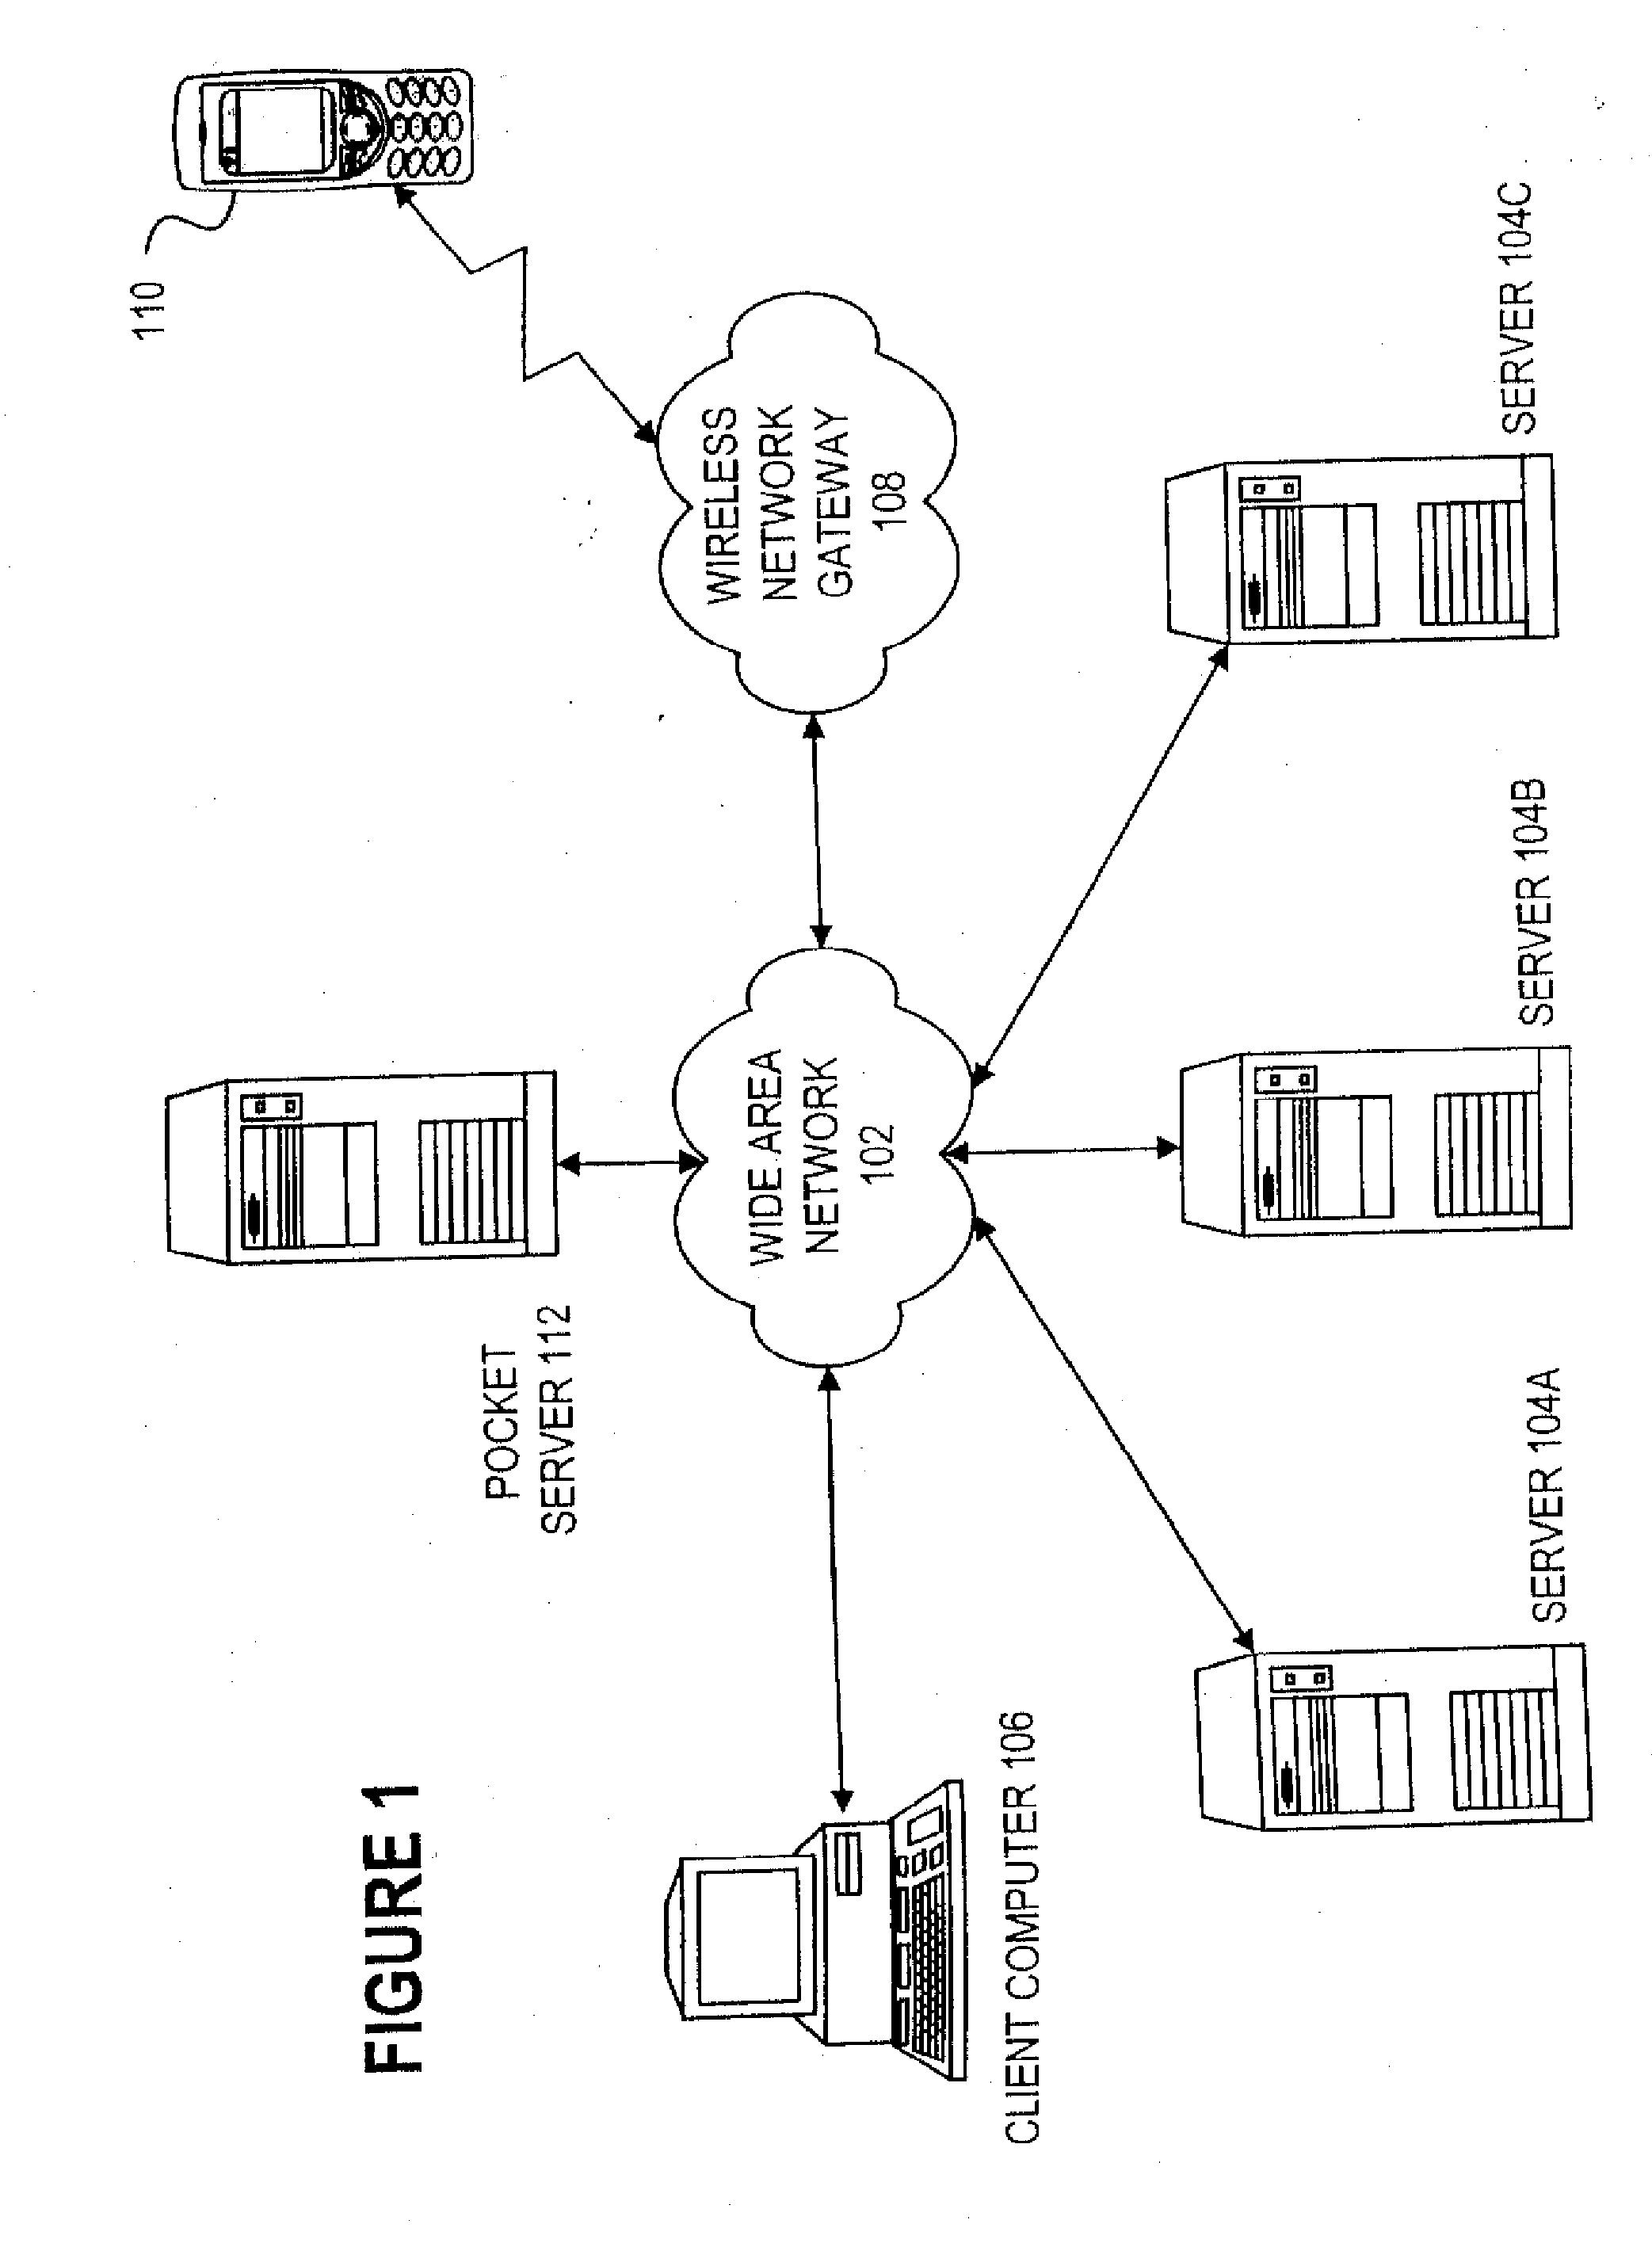 Data Synchronization Mechanism for Information Browsing Systems